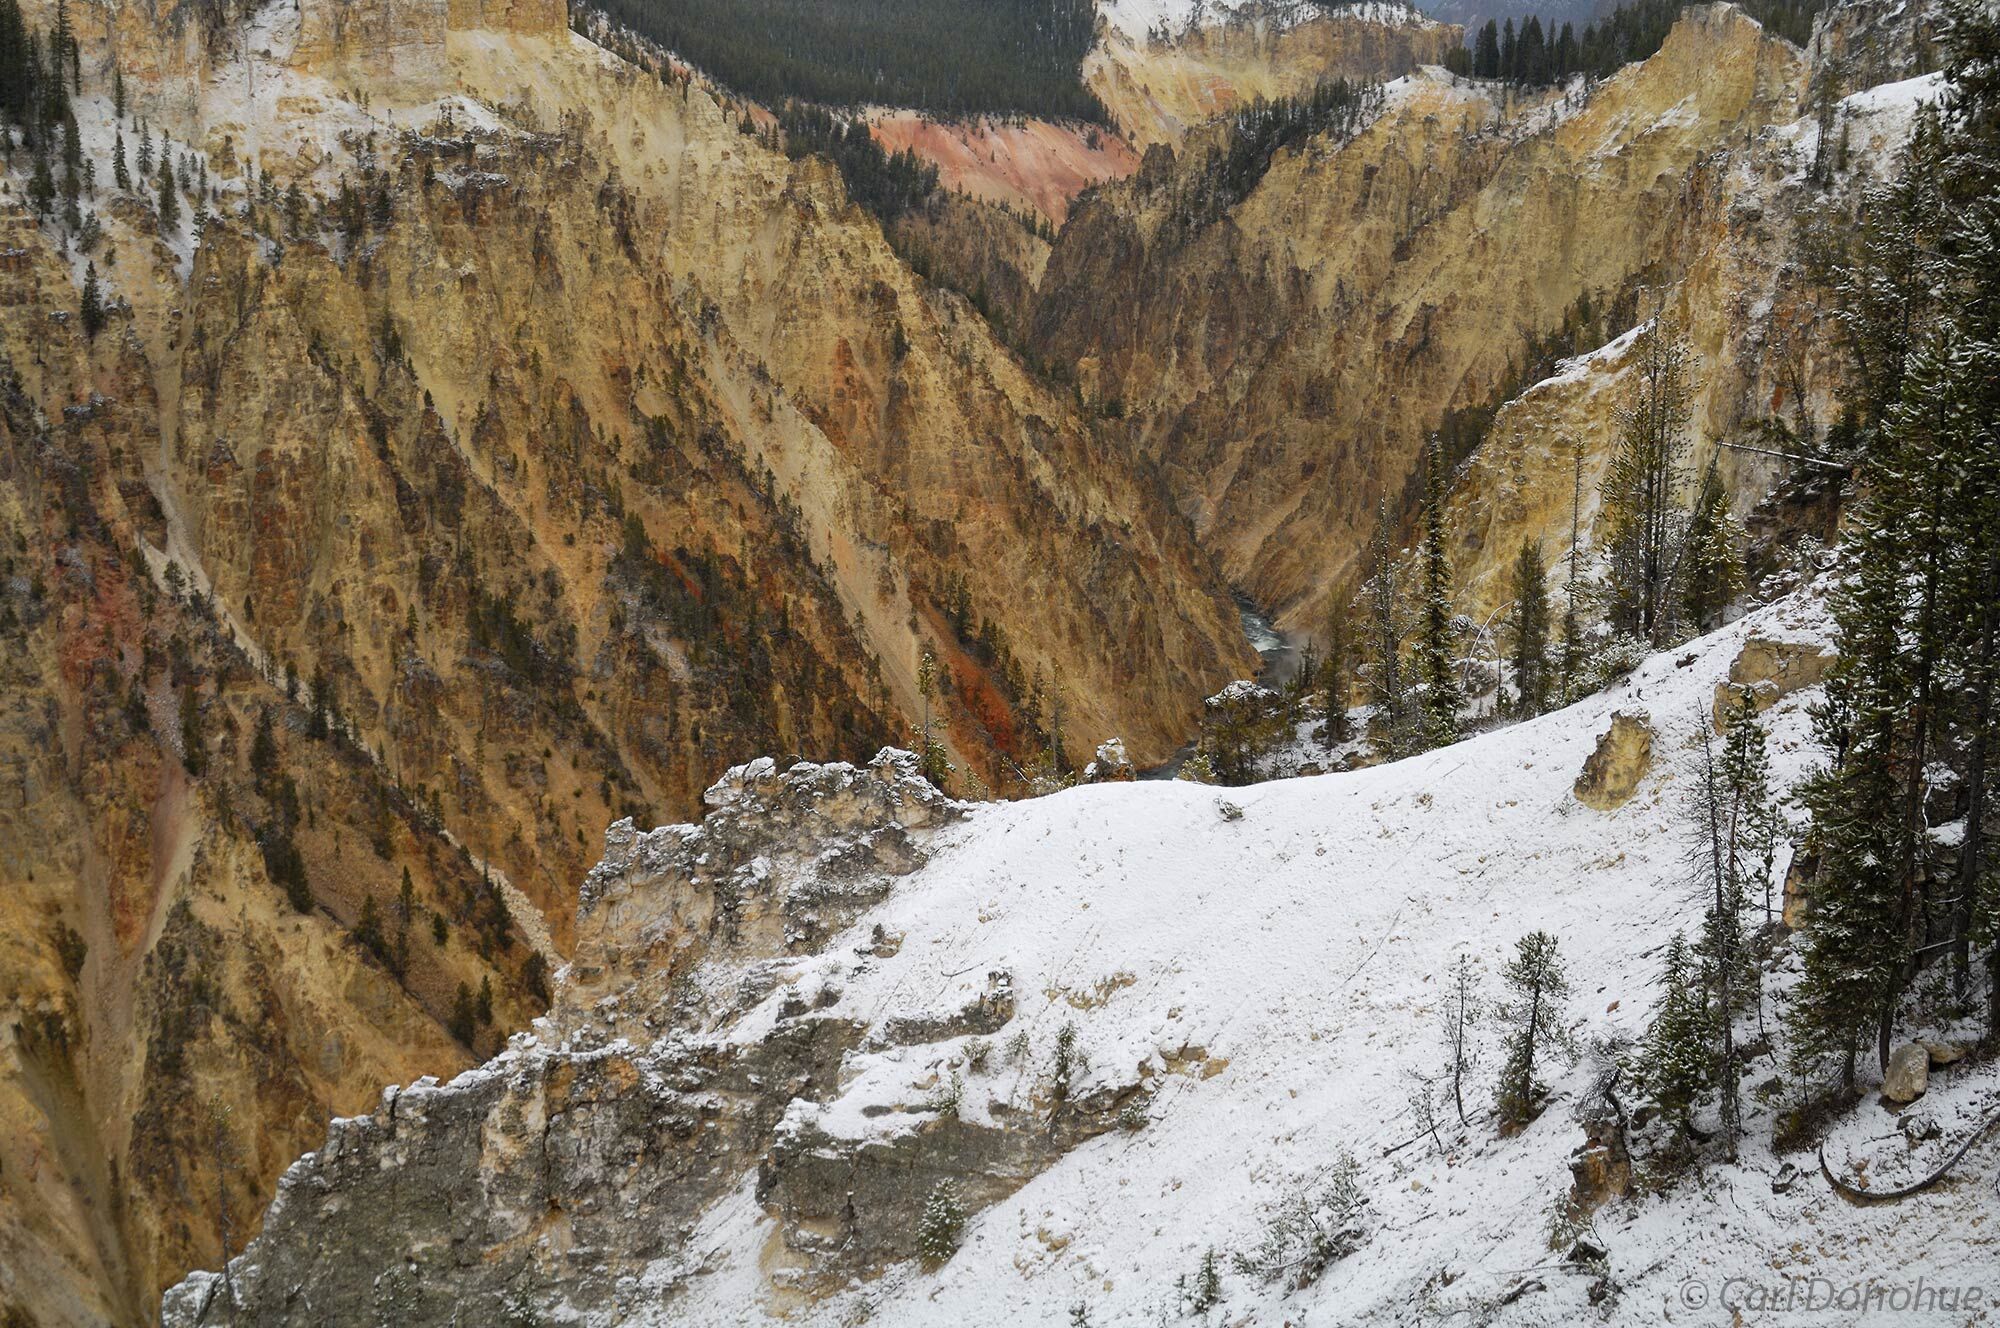 Looking down the Canyon below the Lower Falls in Wyoming's Yellowstone National Park, Wyoming.